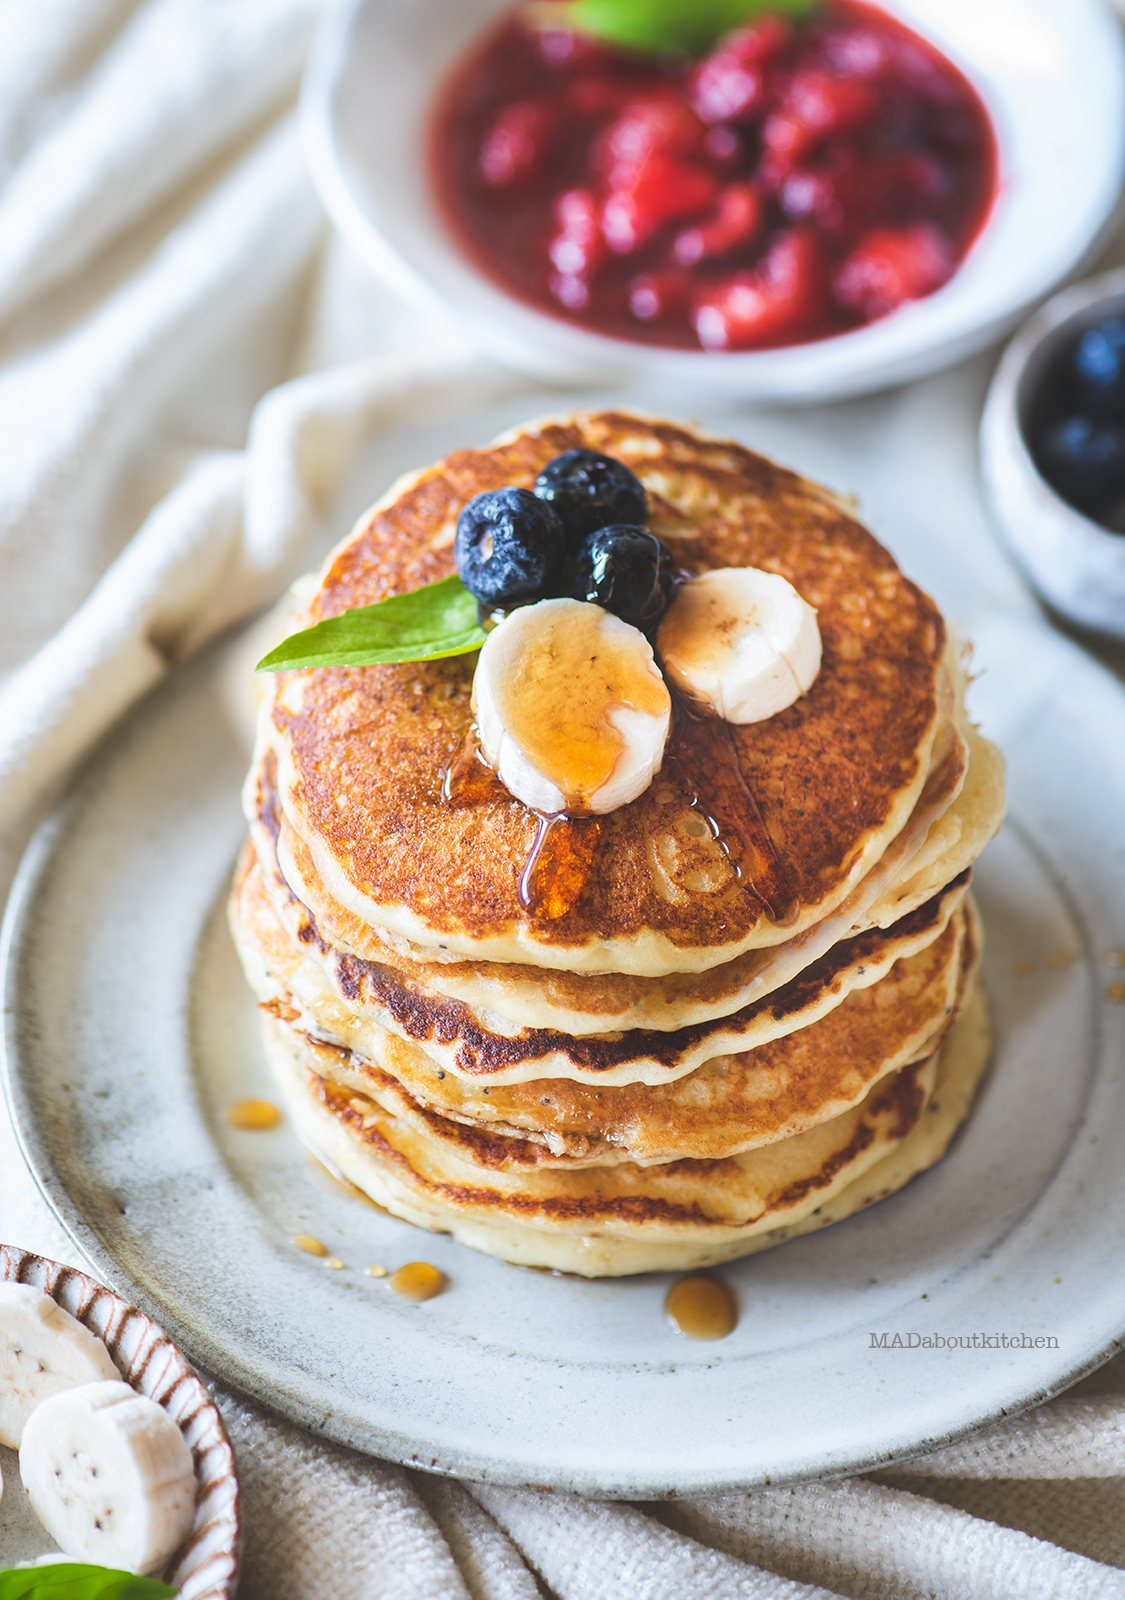 Ricotta Pancakes or Chenna pancakes are one of the most fluffiest of pancakes. Adding cheese makes the pancakes so much more fluffier.